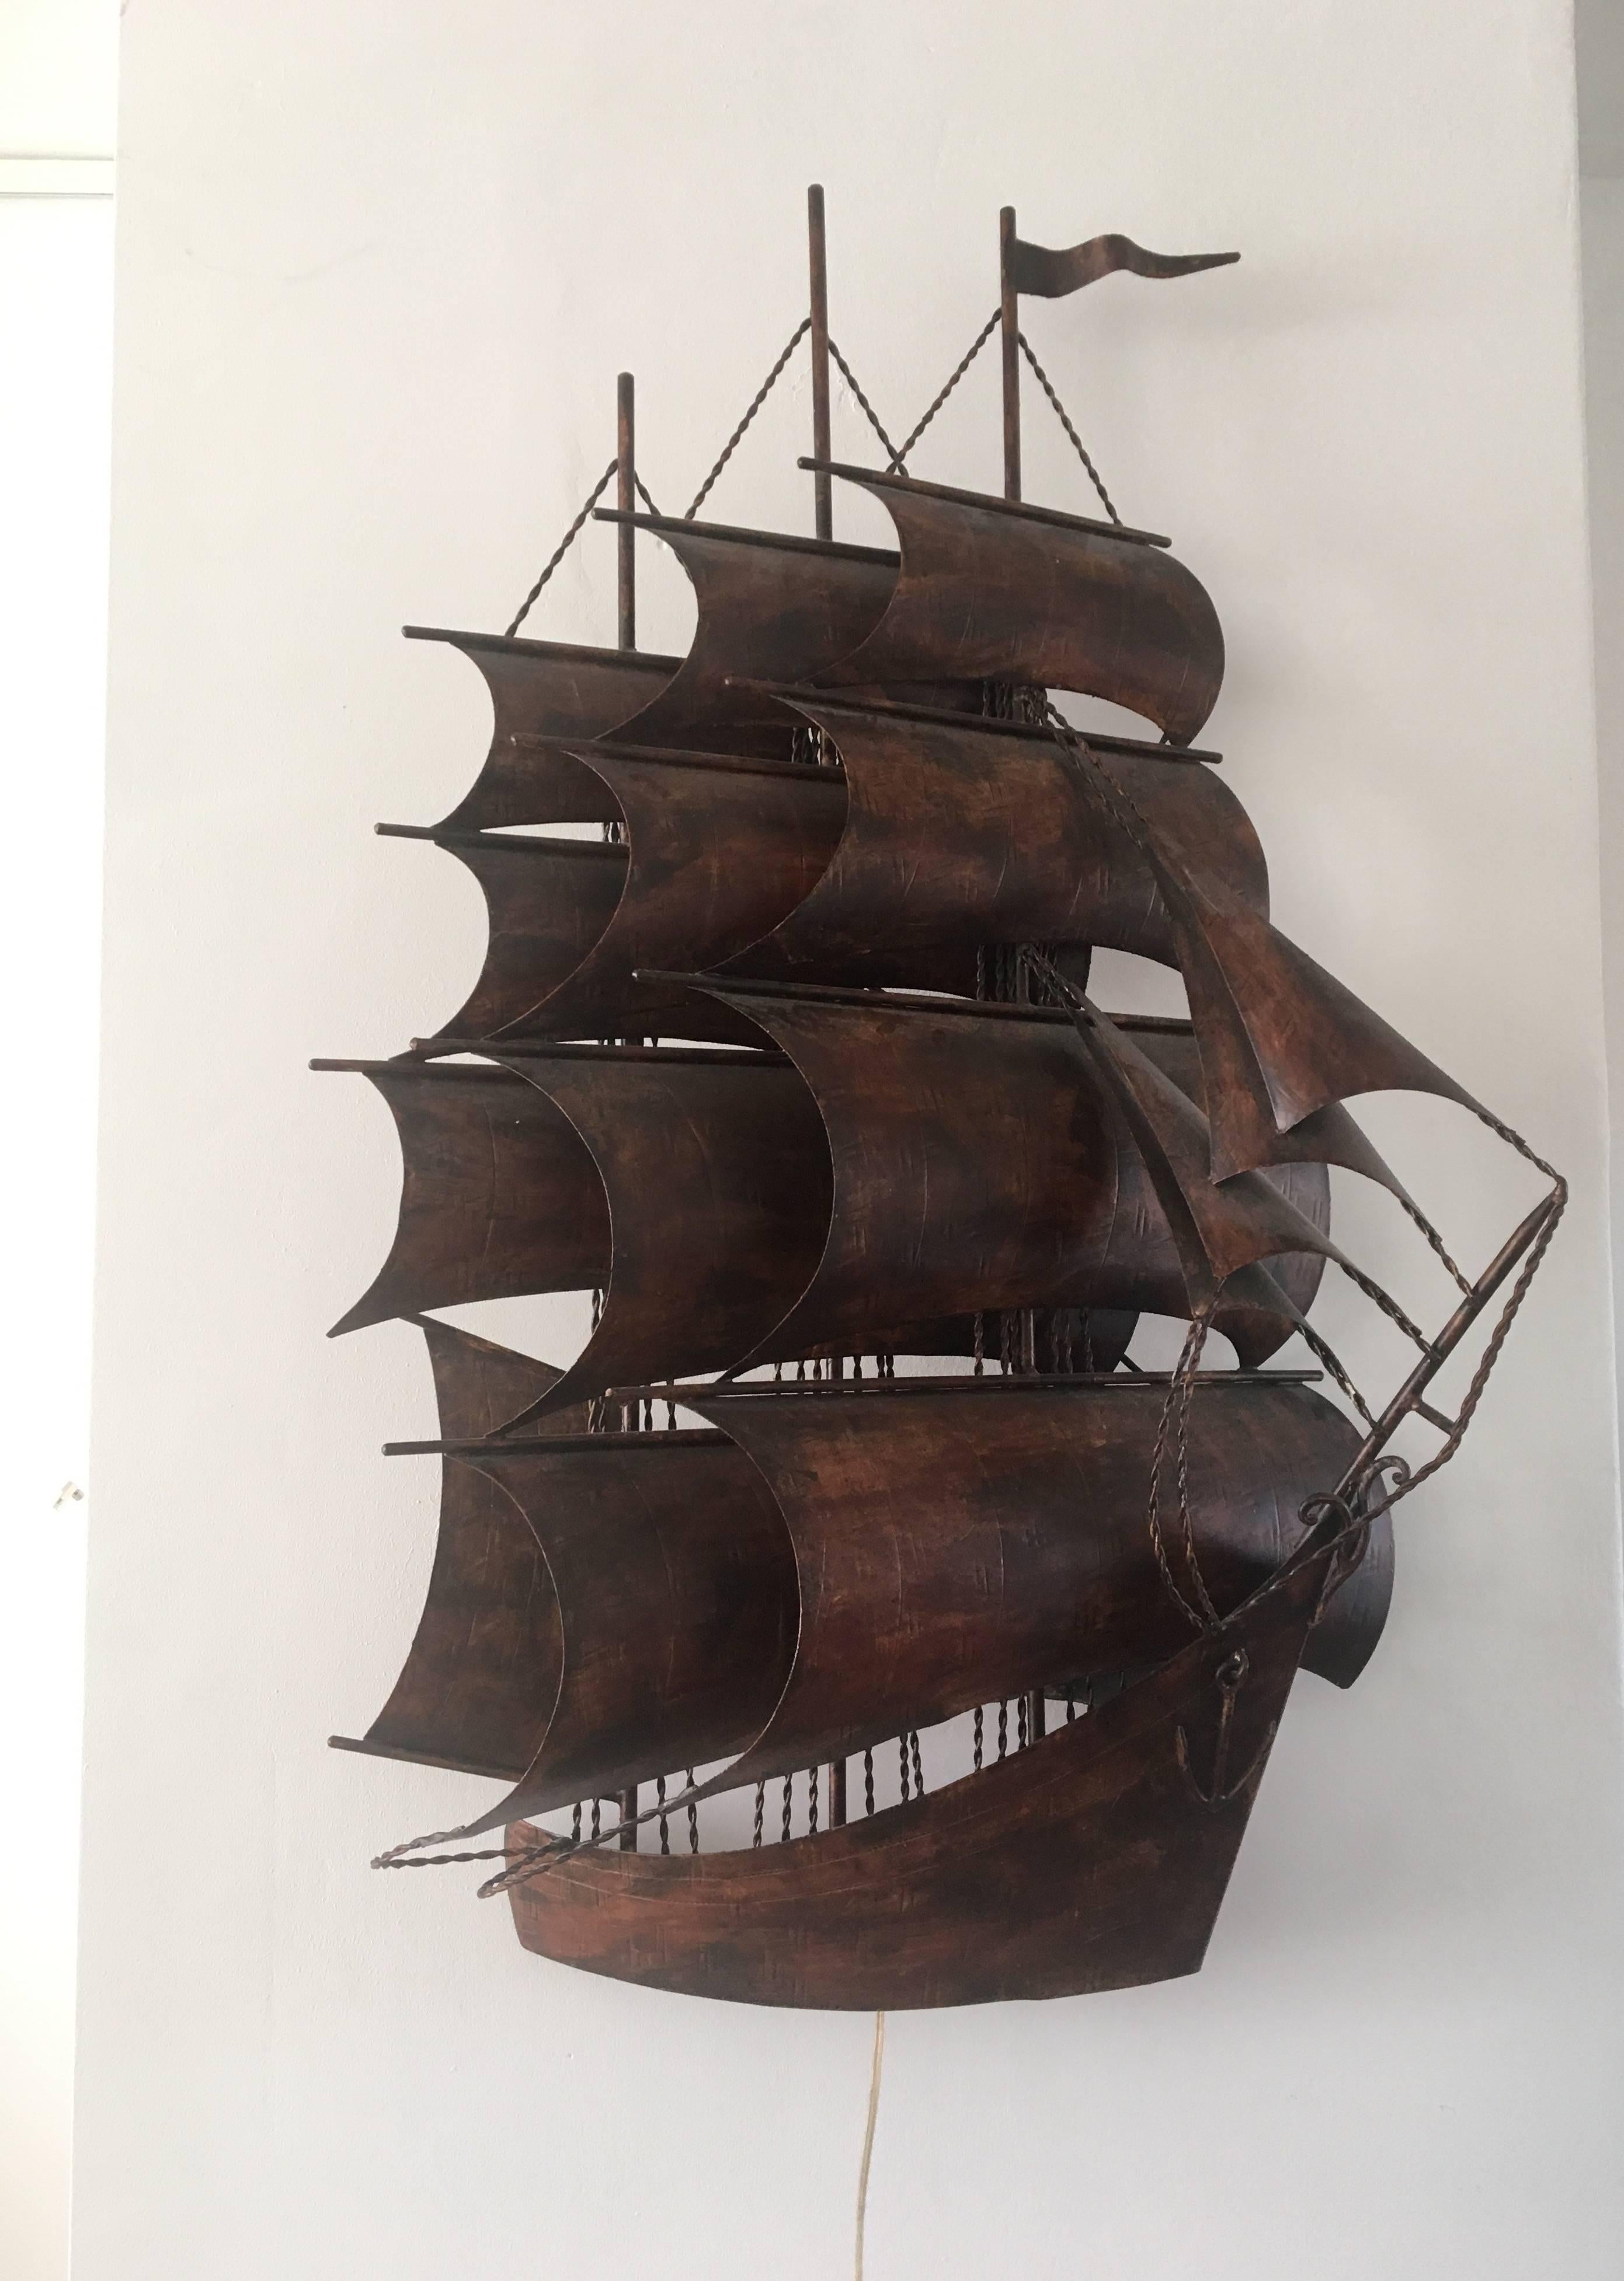 This large metal boat was manufactured, circa the 1960s. It was designed three dimensional, so it looks as if the boat comes right out of the wall. 

This sculpture has lights (6 bulbs) at the back to give it a beautifull extra dimension. The